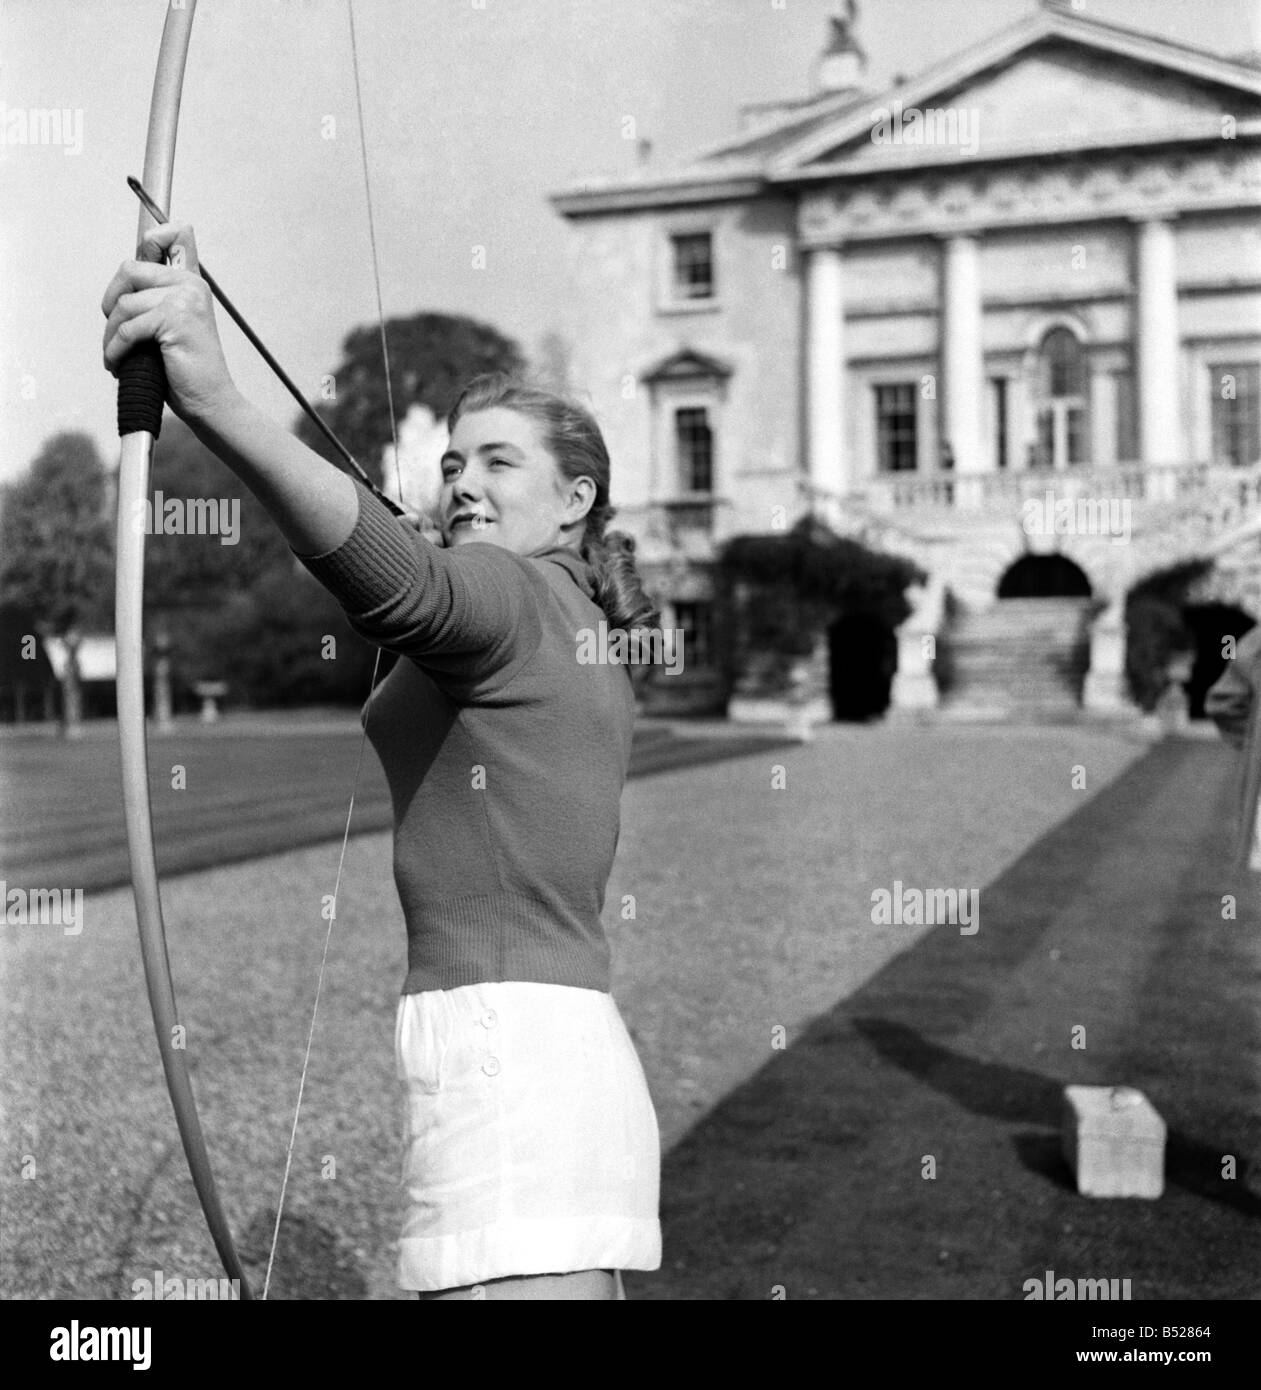 Taking part in the documentary film 'Archery' which is being made by Faro Films, London, is pretty Miss Sylvia Chapman, 18, from Kingsbury. Seen have filming in Richmond park. April 1953 D2093-001 Stock Photo